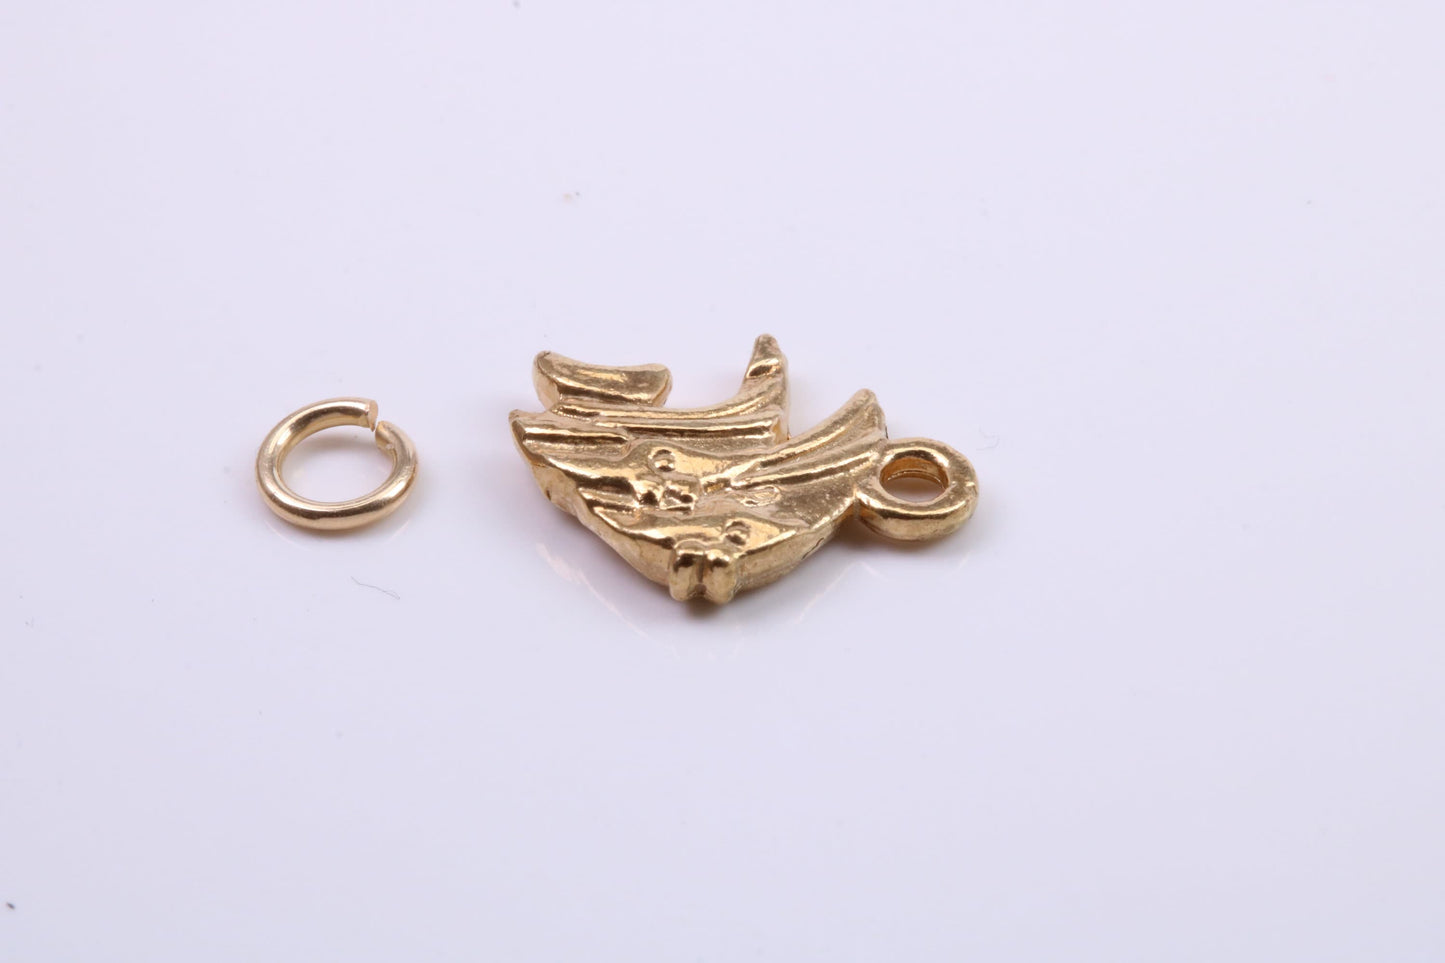 Angel Fish Charm, Traditional Charm, Made from Solid 9ct Yellow Gold, British Hallmarked, Complete with Attachment Link